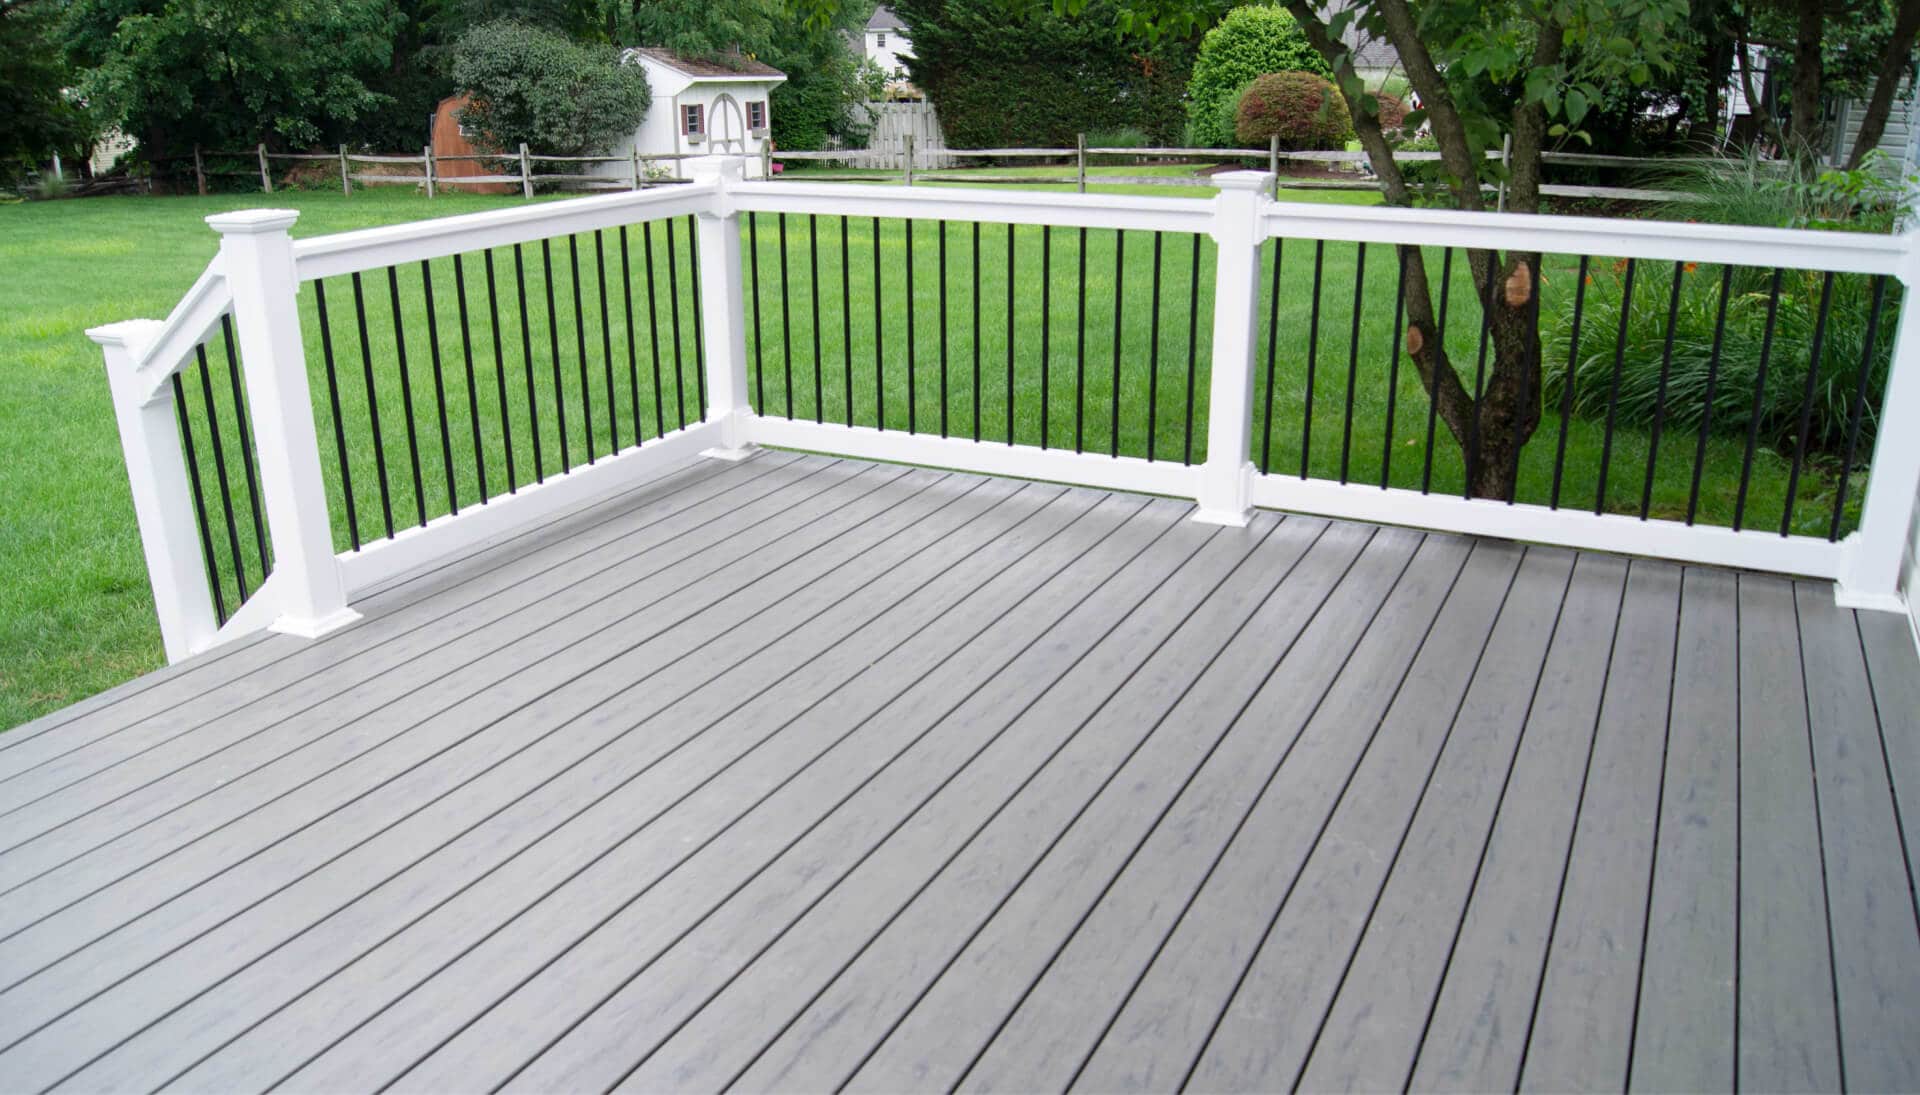 Specialists in deck railing and covers Salt Lake City, Utah